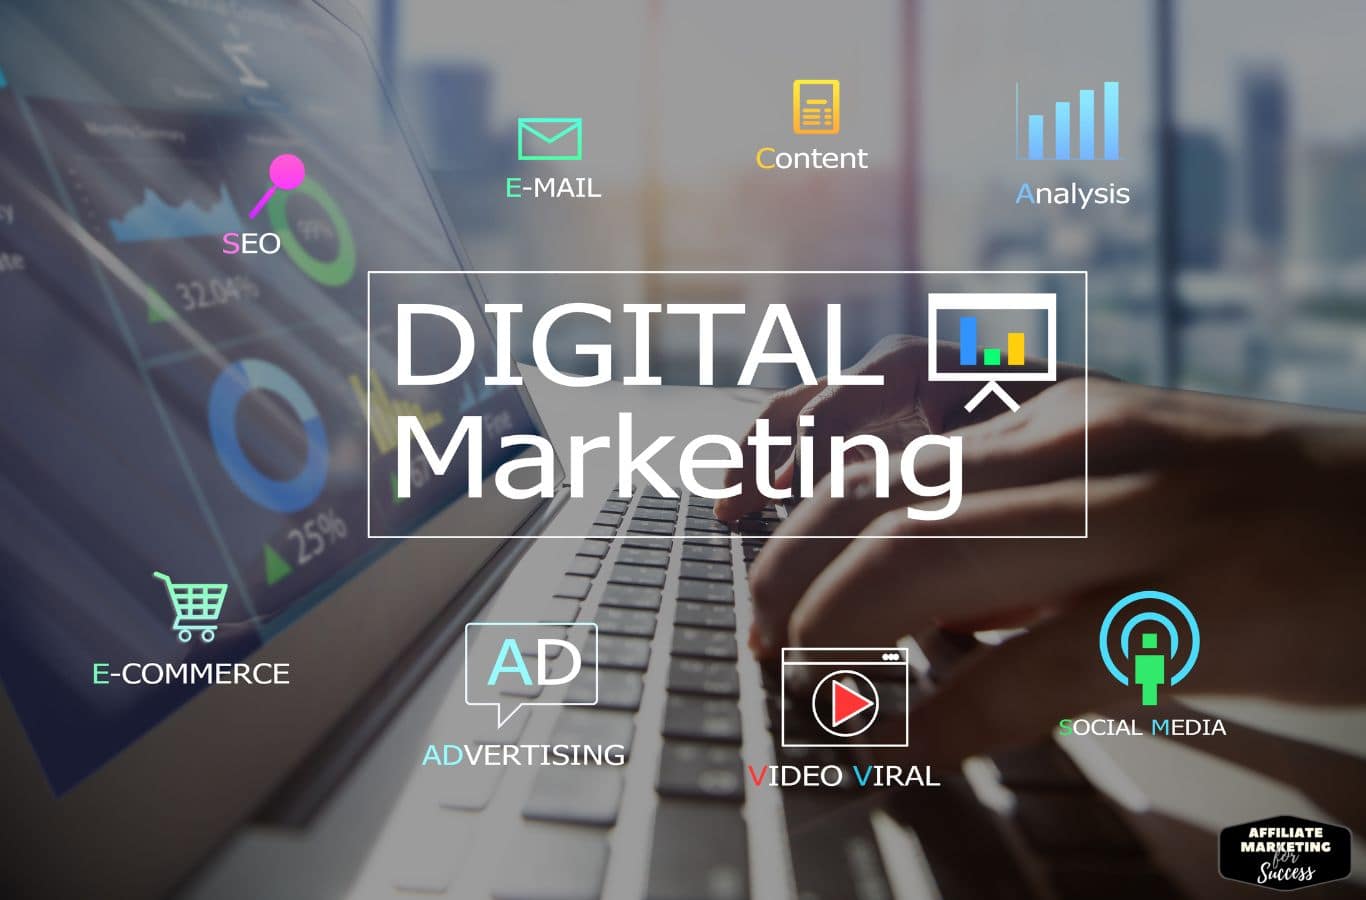 Digital Marketing Definition - All You Need To Know